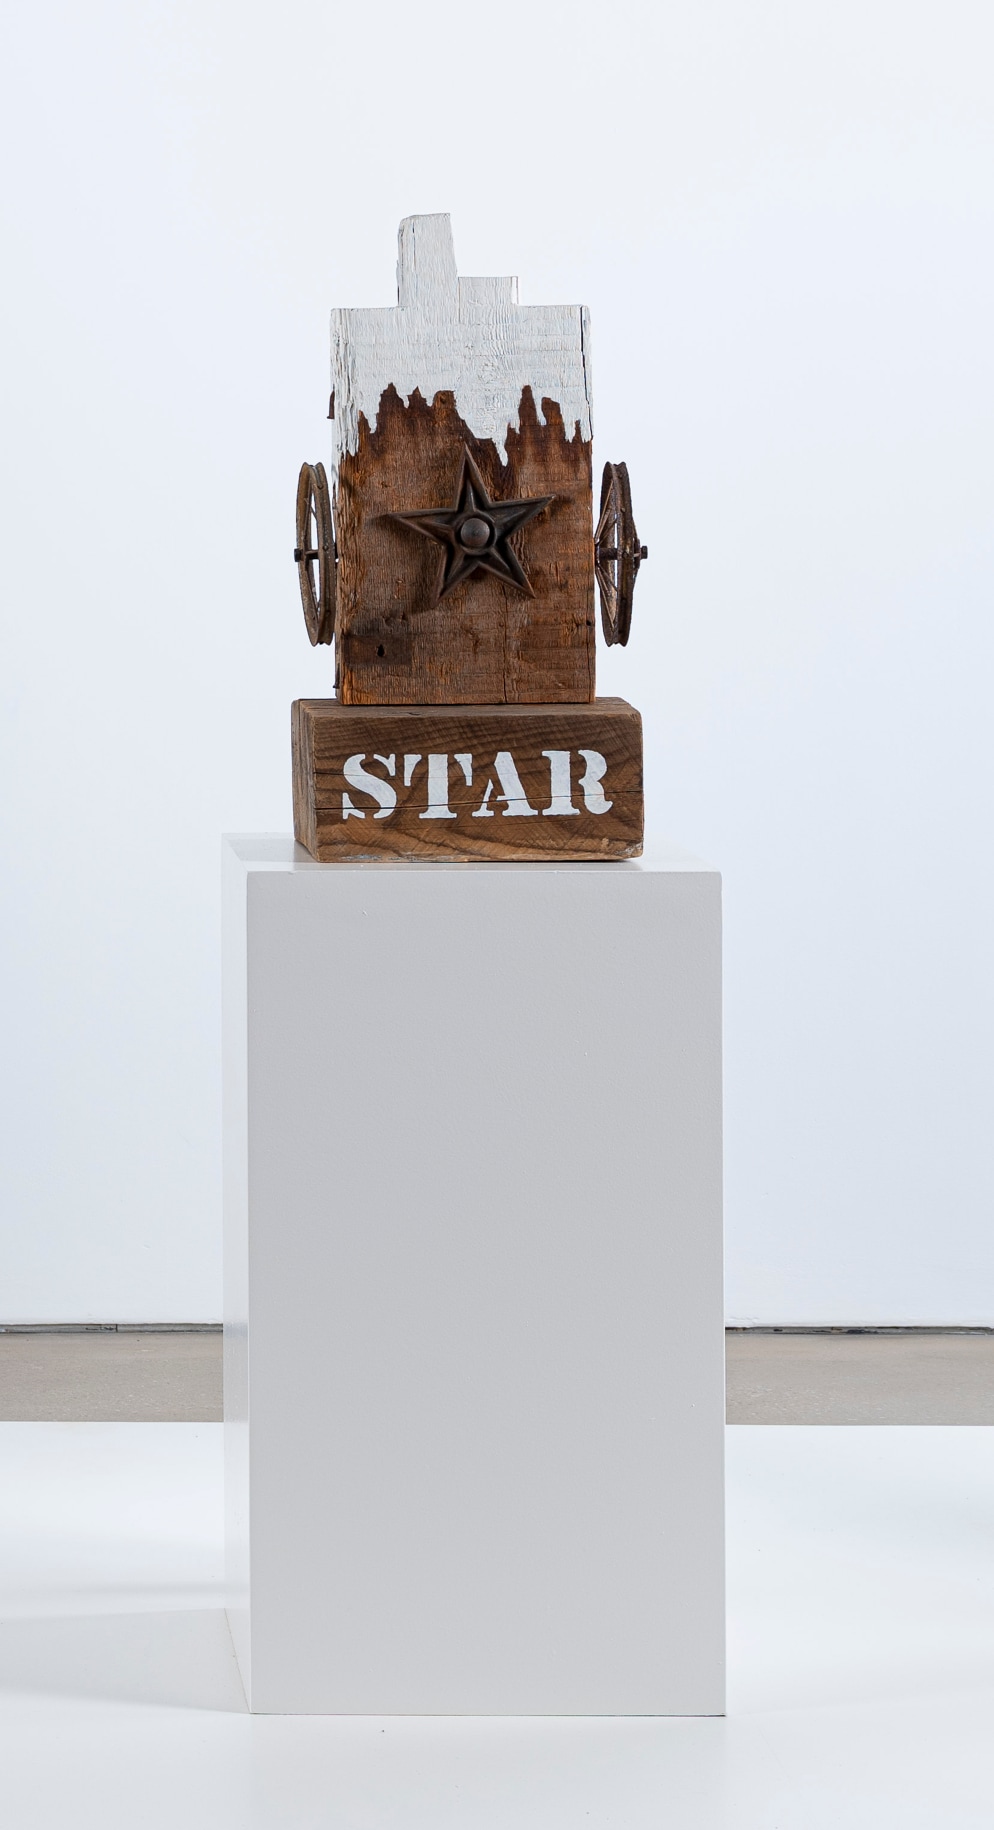 A 25 1/2 by 12 1/2 by 11 3/4 inch sculpture consisting of fragment of a wooden beam with a haunched tenon, resting on a wooden base. The work's title, &quot;Star,&quot; is painted in white stenciled letters across the front of the base. A metal star is affixed to the center front of the sculpture, and a small wheel has been affixed on both sides of the sculpture, to the left and right of the star. The top part of the sculpture has been painted white, with an uneven bottom edge, resembling dripping paint.